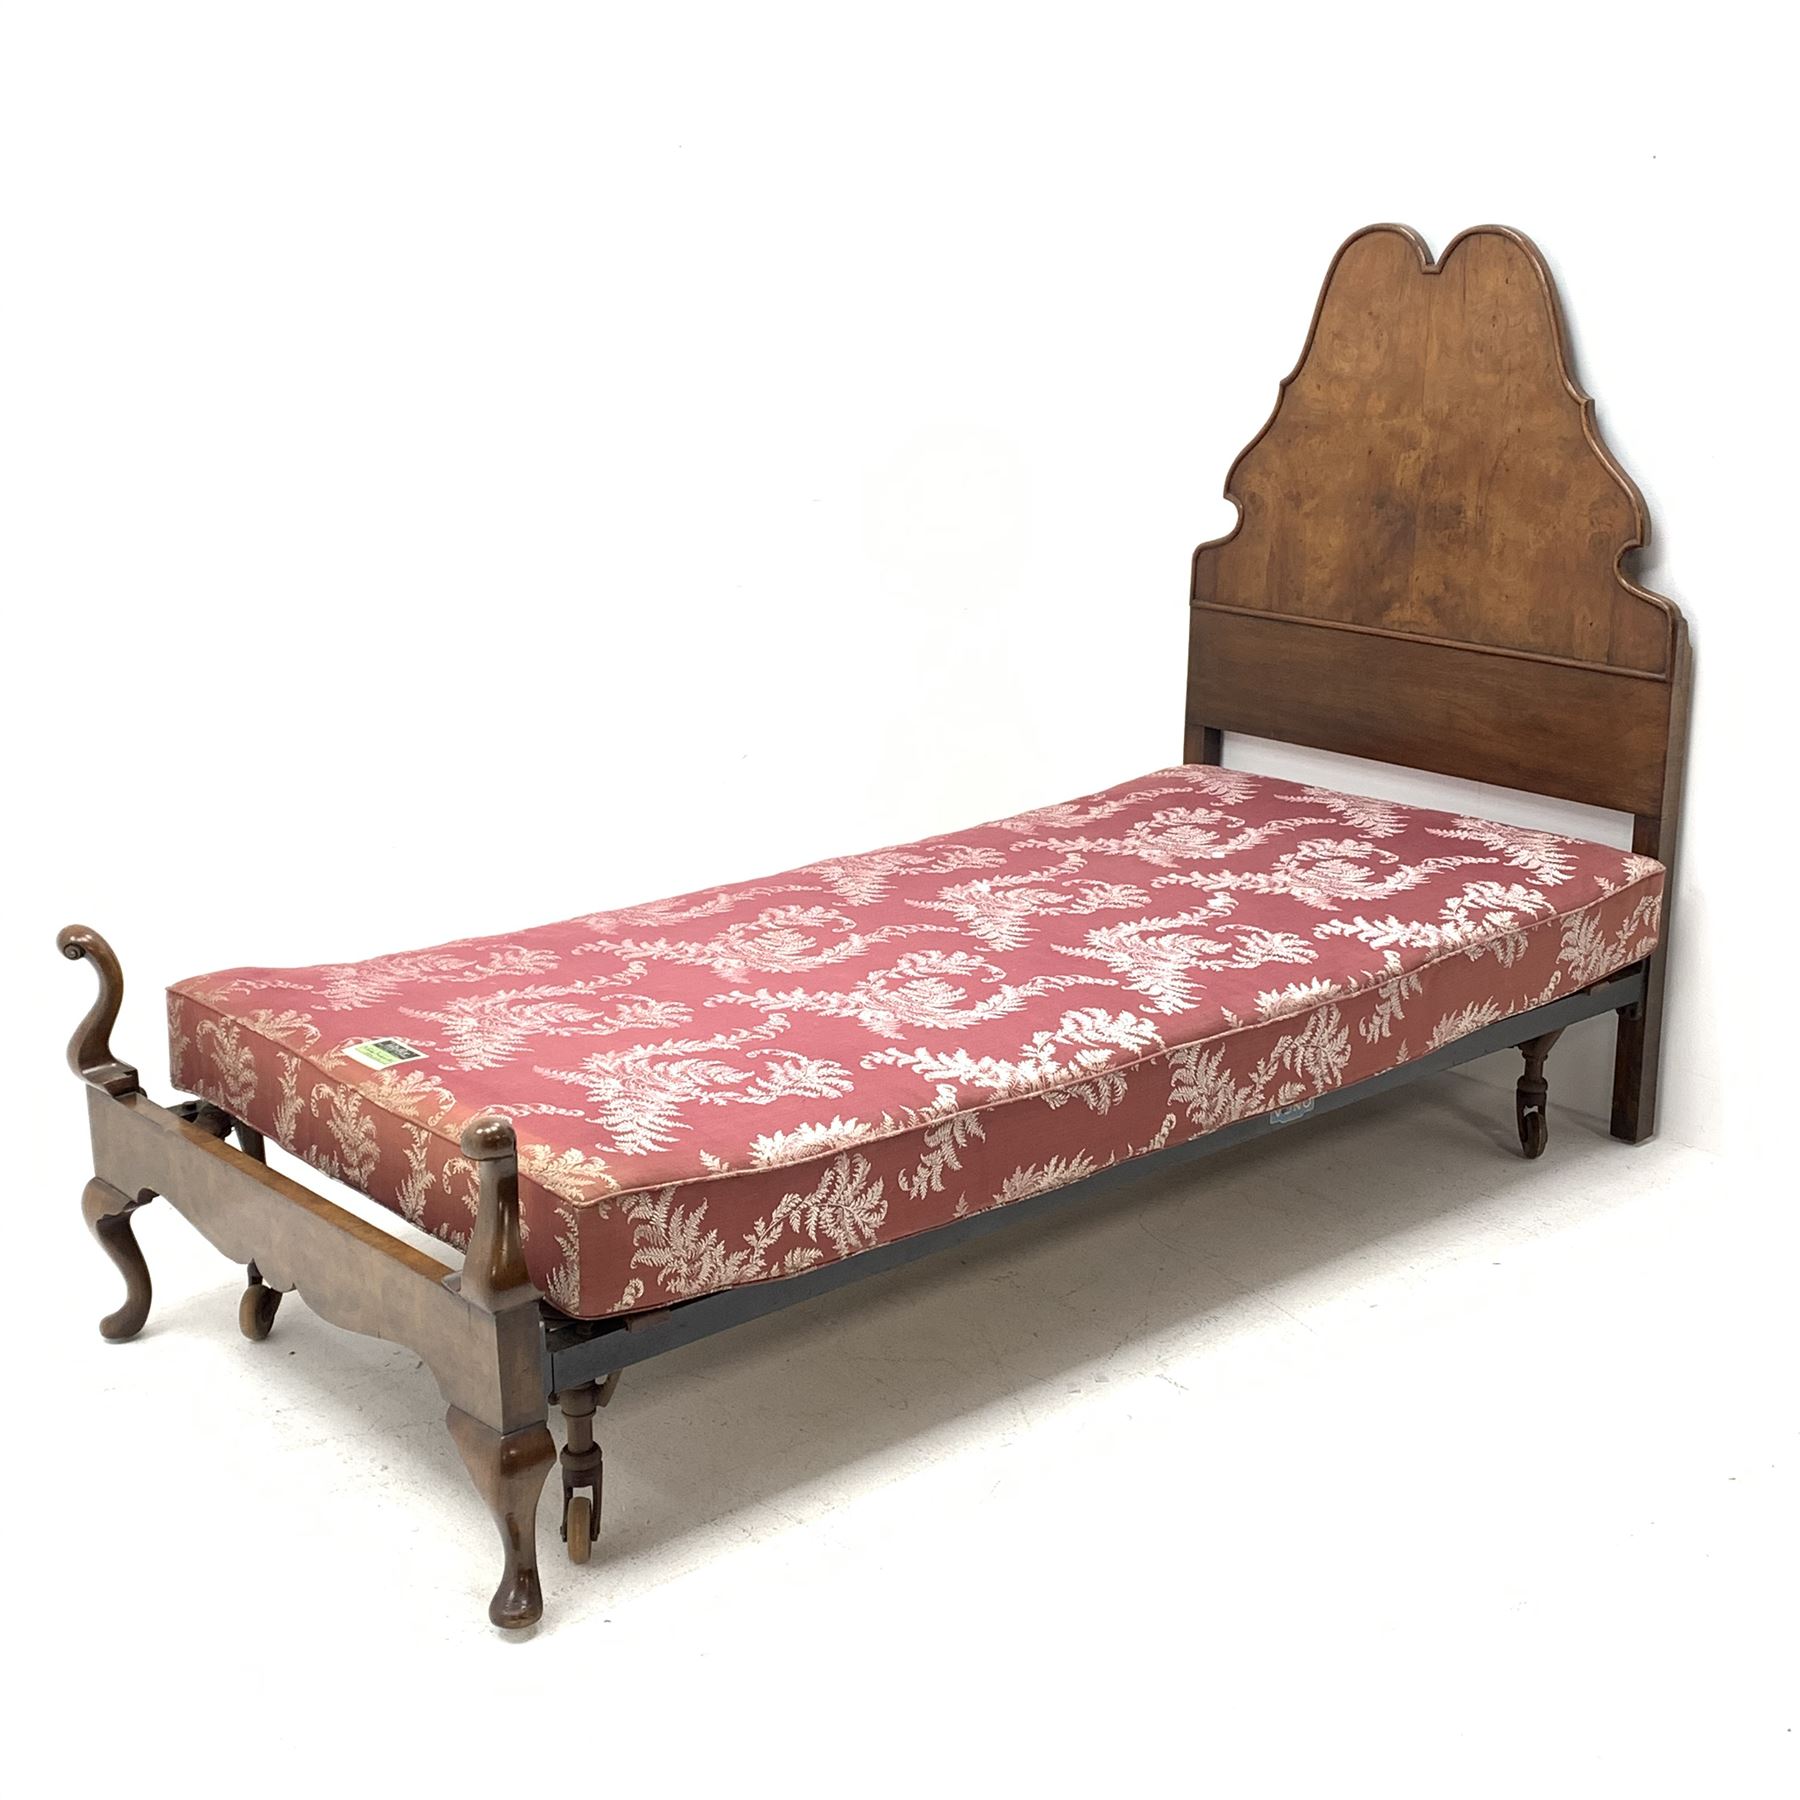 Pair 20th century walnut single 3' bedsteads, shaped and figured headboards, the footboards with scr - Image 8 of 9